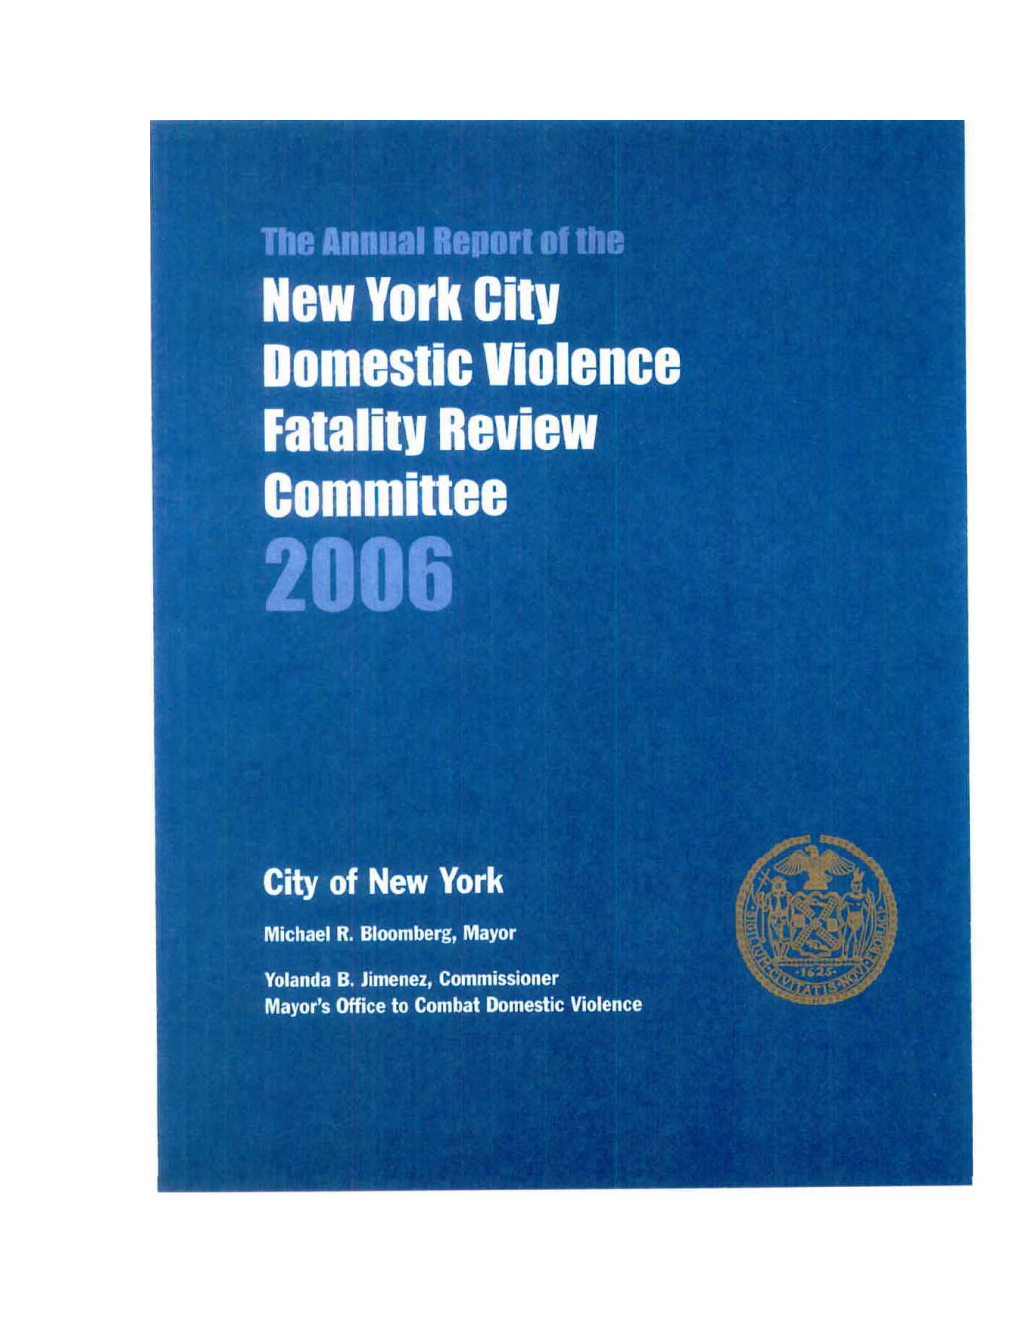 New York City Domestic Violence Fatality Review Committee